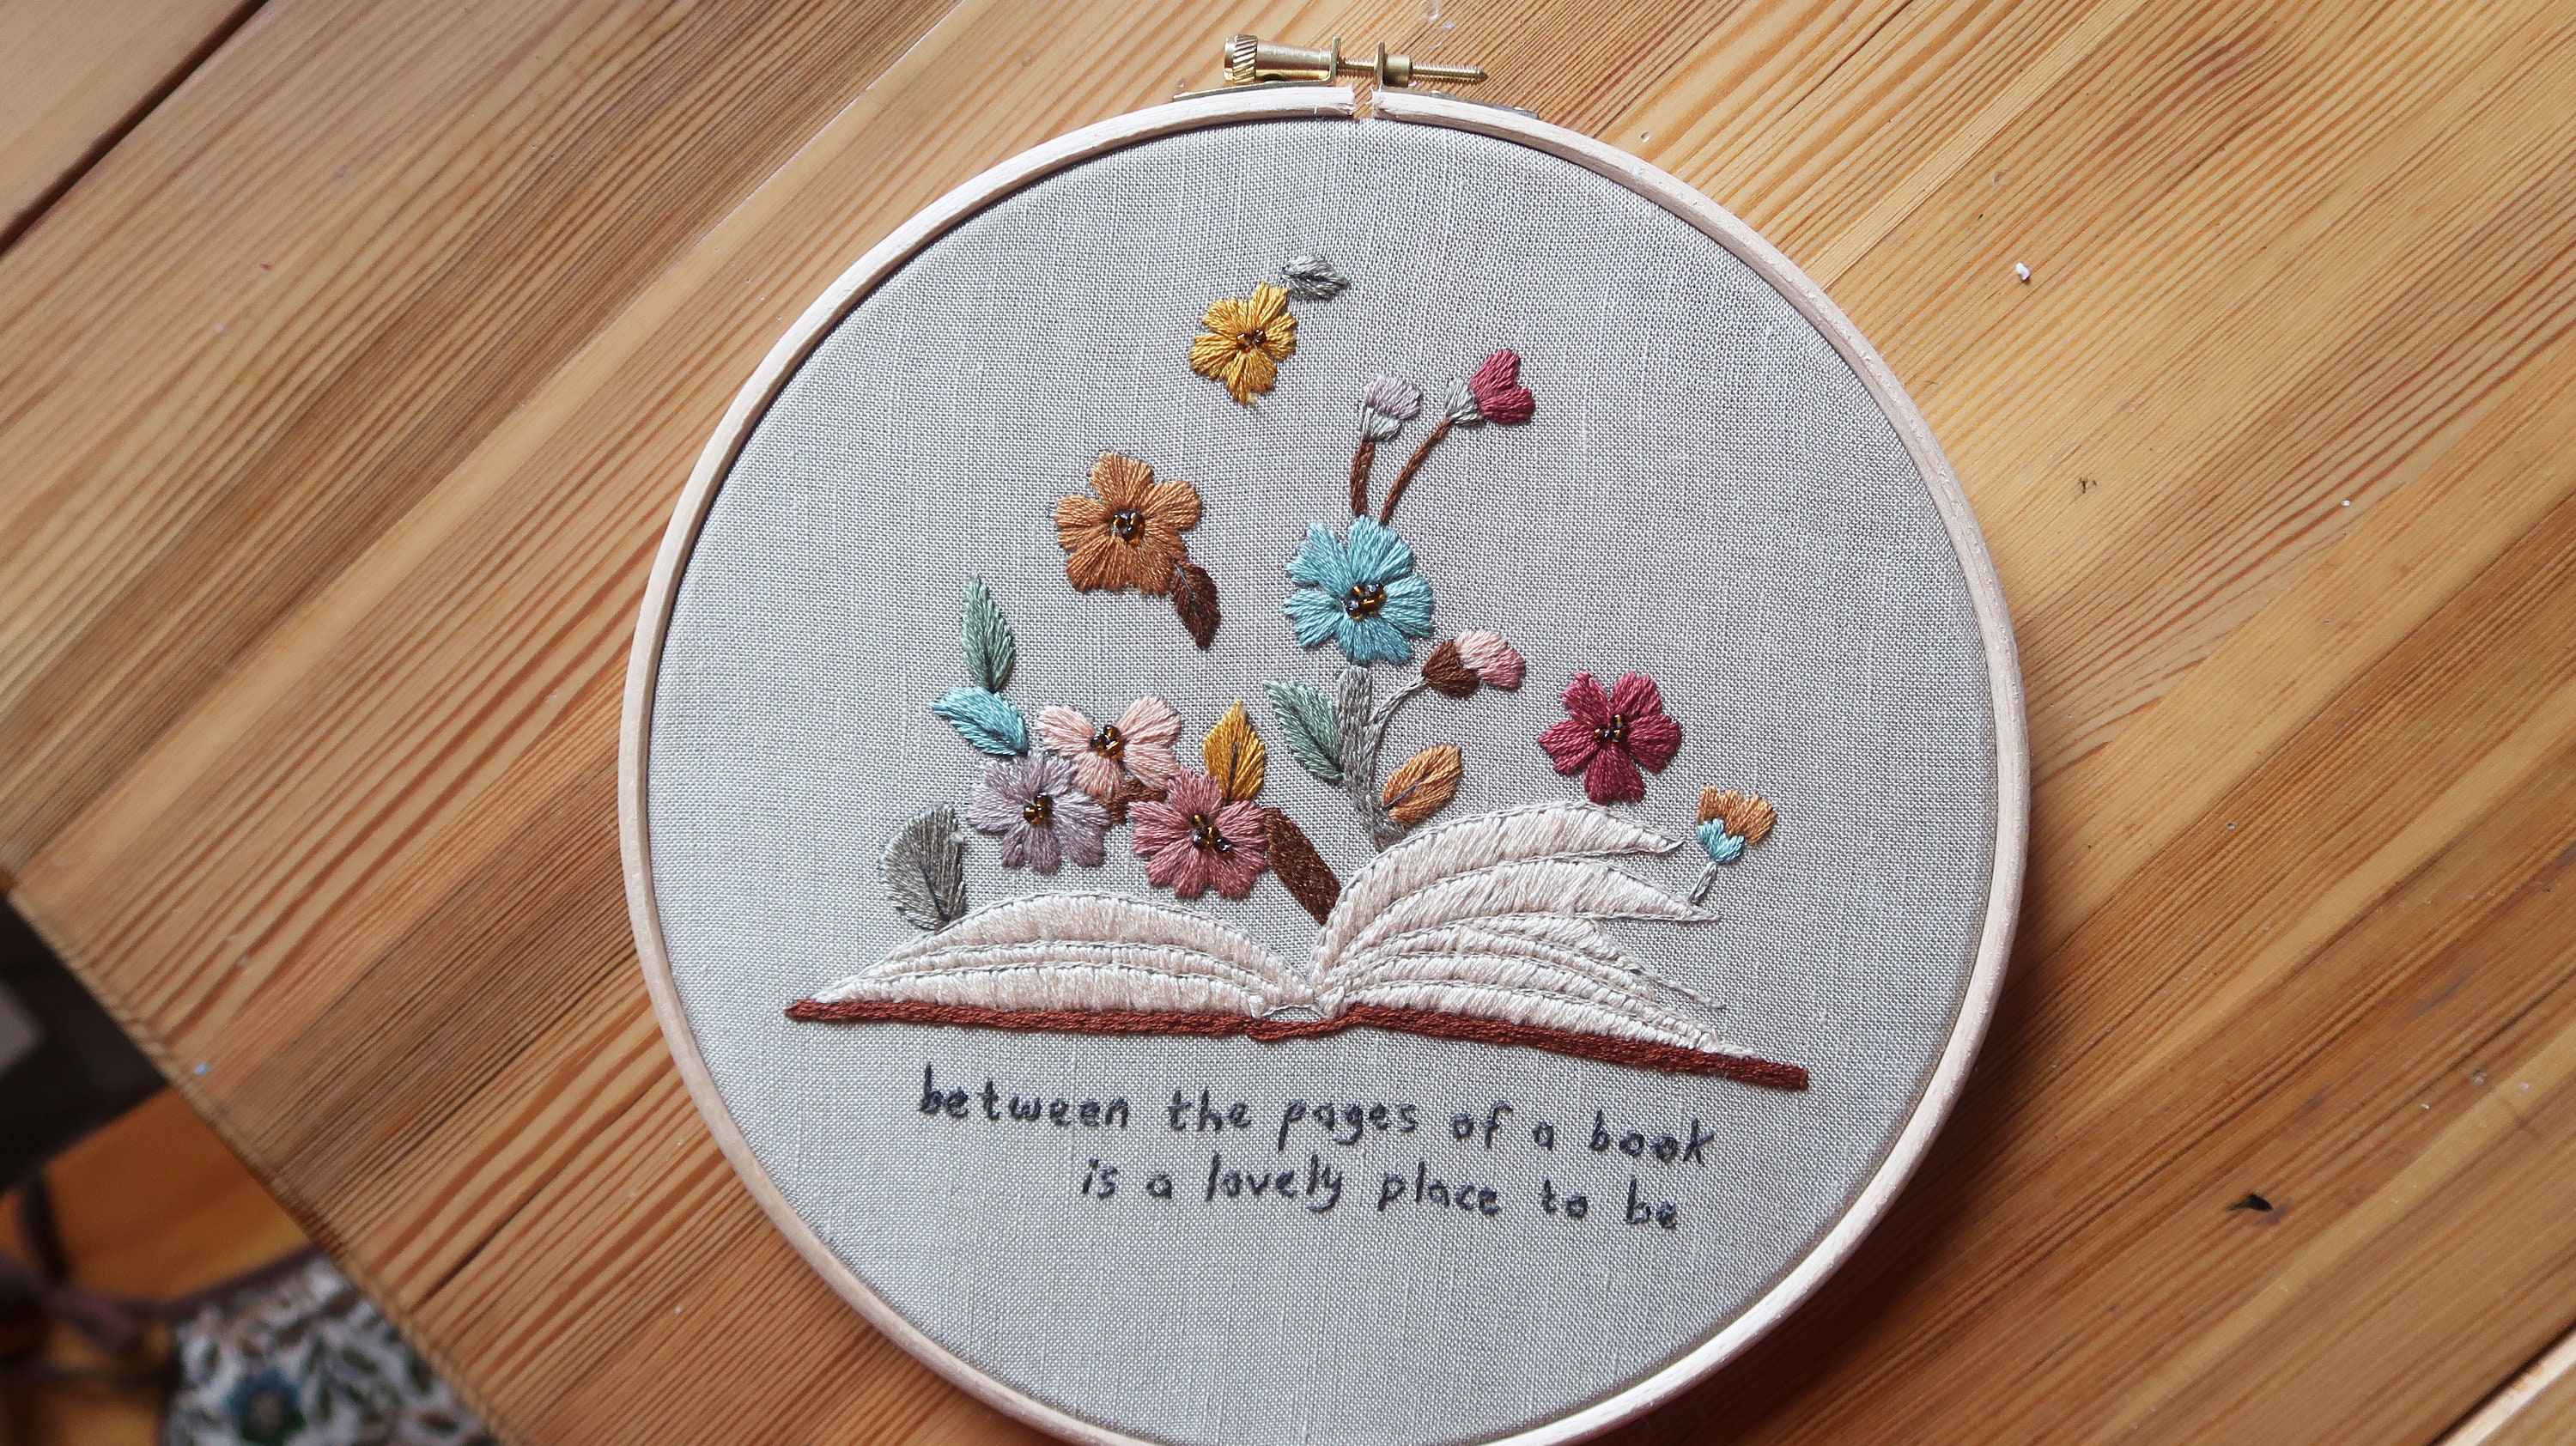 Open Book Hand Embroidery PDF Downloadable Pattern Tutorial / Instant  Download / Beginner Embroidery Hoop Art 